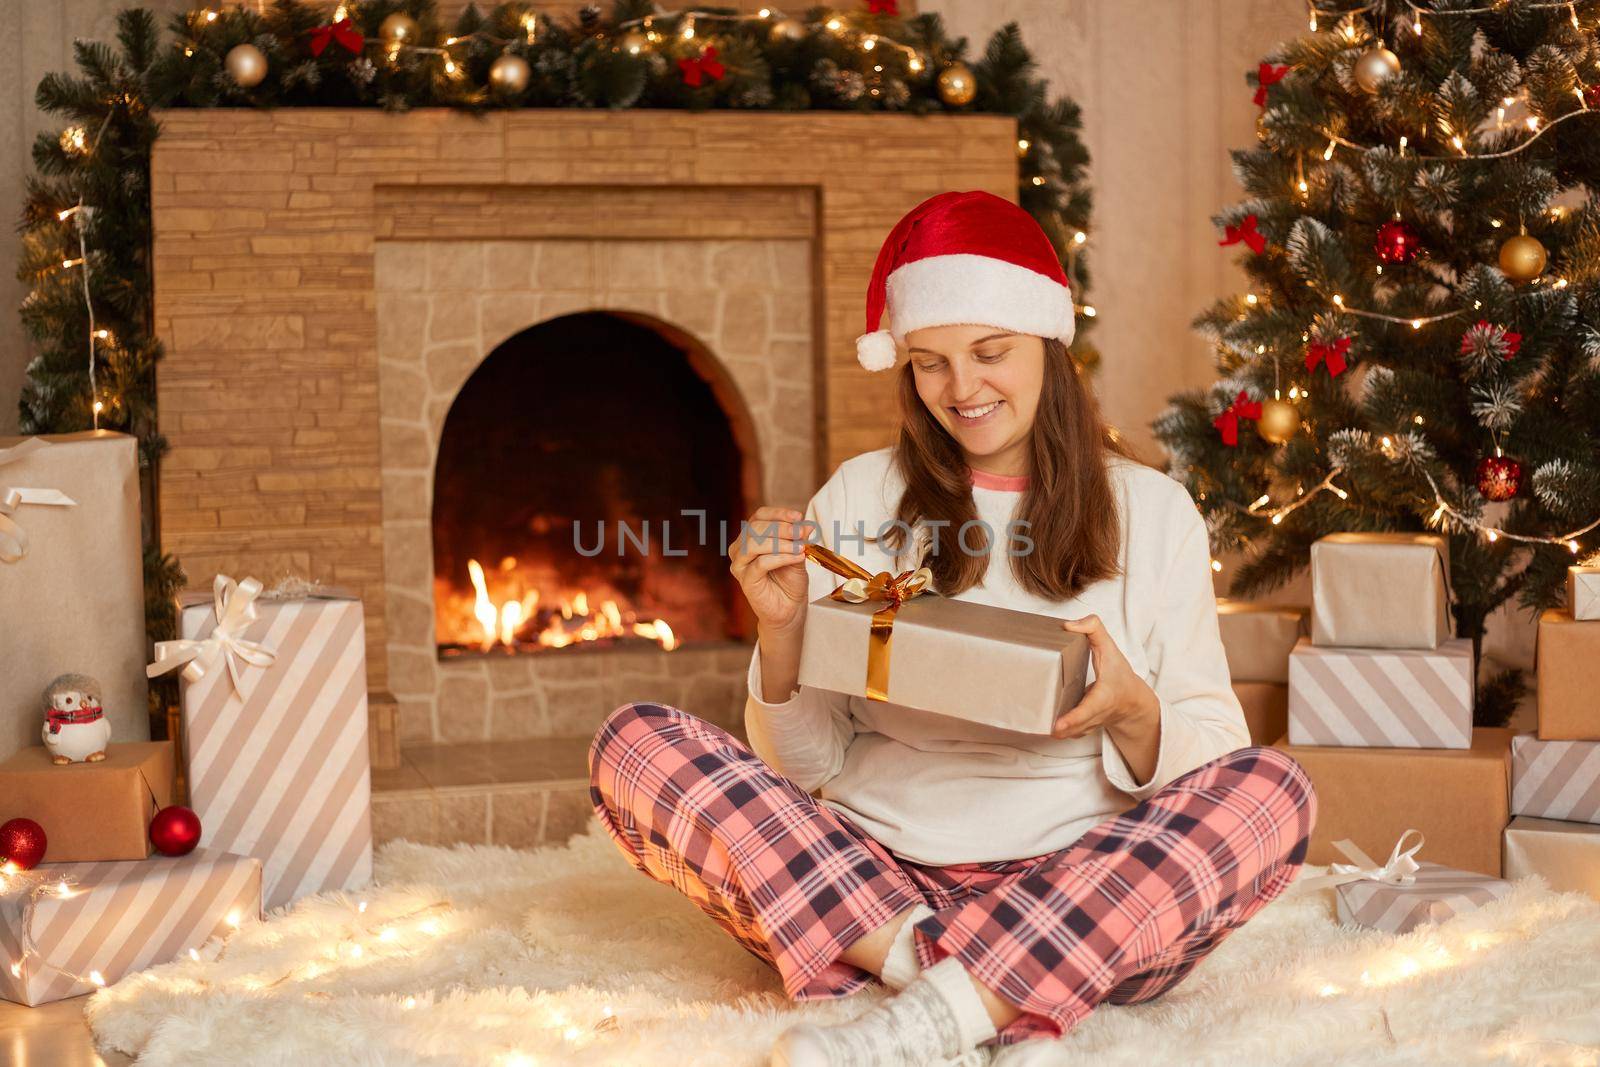 Caucasian woman opening present box while sitting on soft carpet in festive living room, lady wearing checkered pants, white shirt and santa claus hat, celebrating Christmas at home.